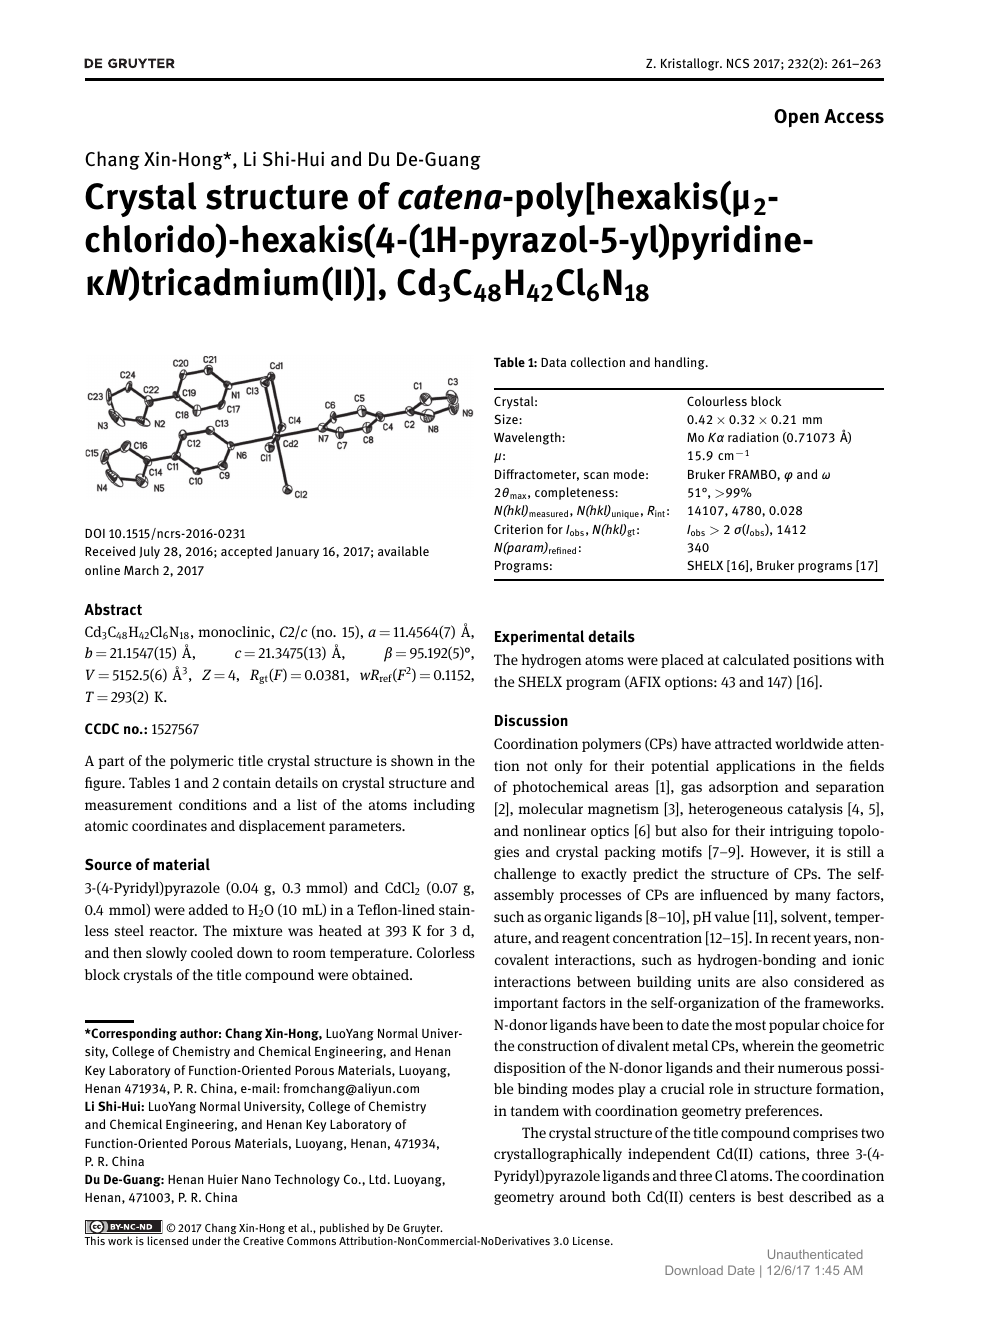 Crystal Structure Of Catena Poly Hexakis M2 Chlorido Hexakis 4 1h Pyrazol 5 Yl Pyridine Kn Tricadmium Ii Cd3c48h42cl6n18 Topic Of Research Paper In Chemical Sciences Download Scholarly Article Pdf And Read For Free On Cyberleninka Open Science Hub